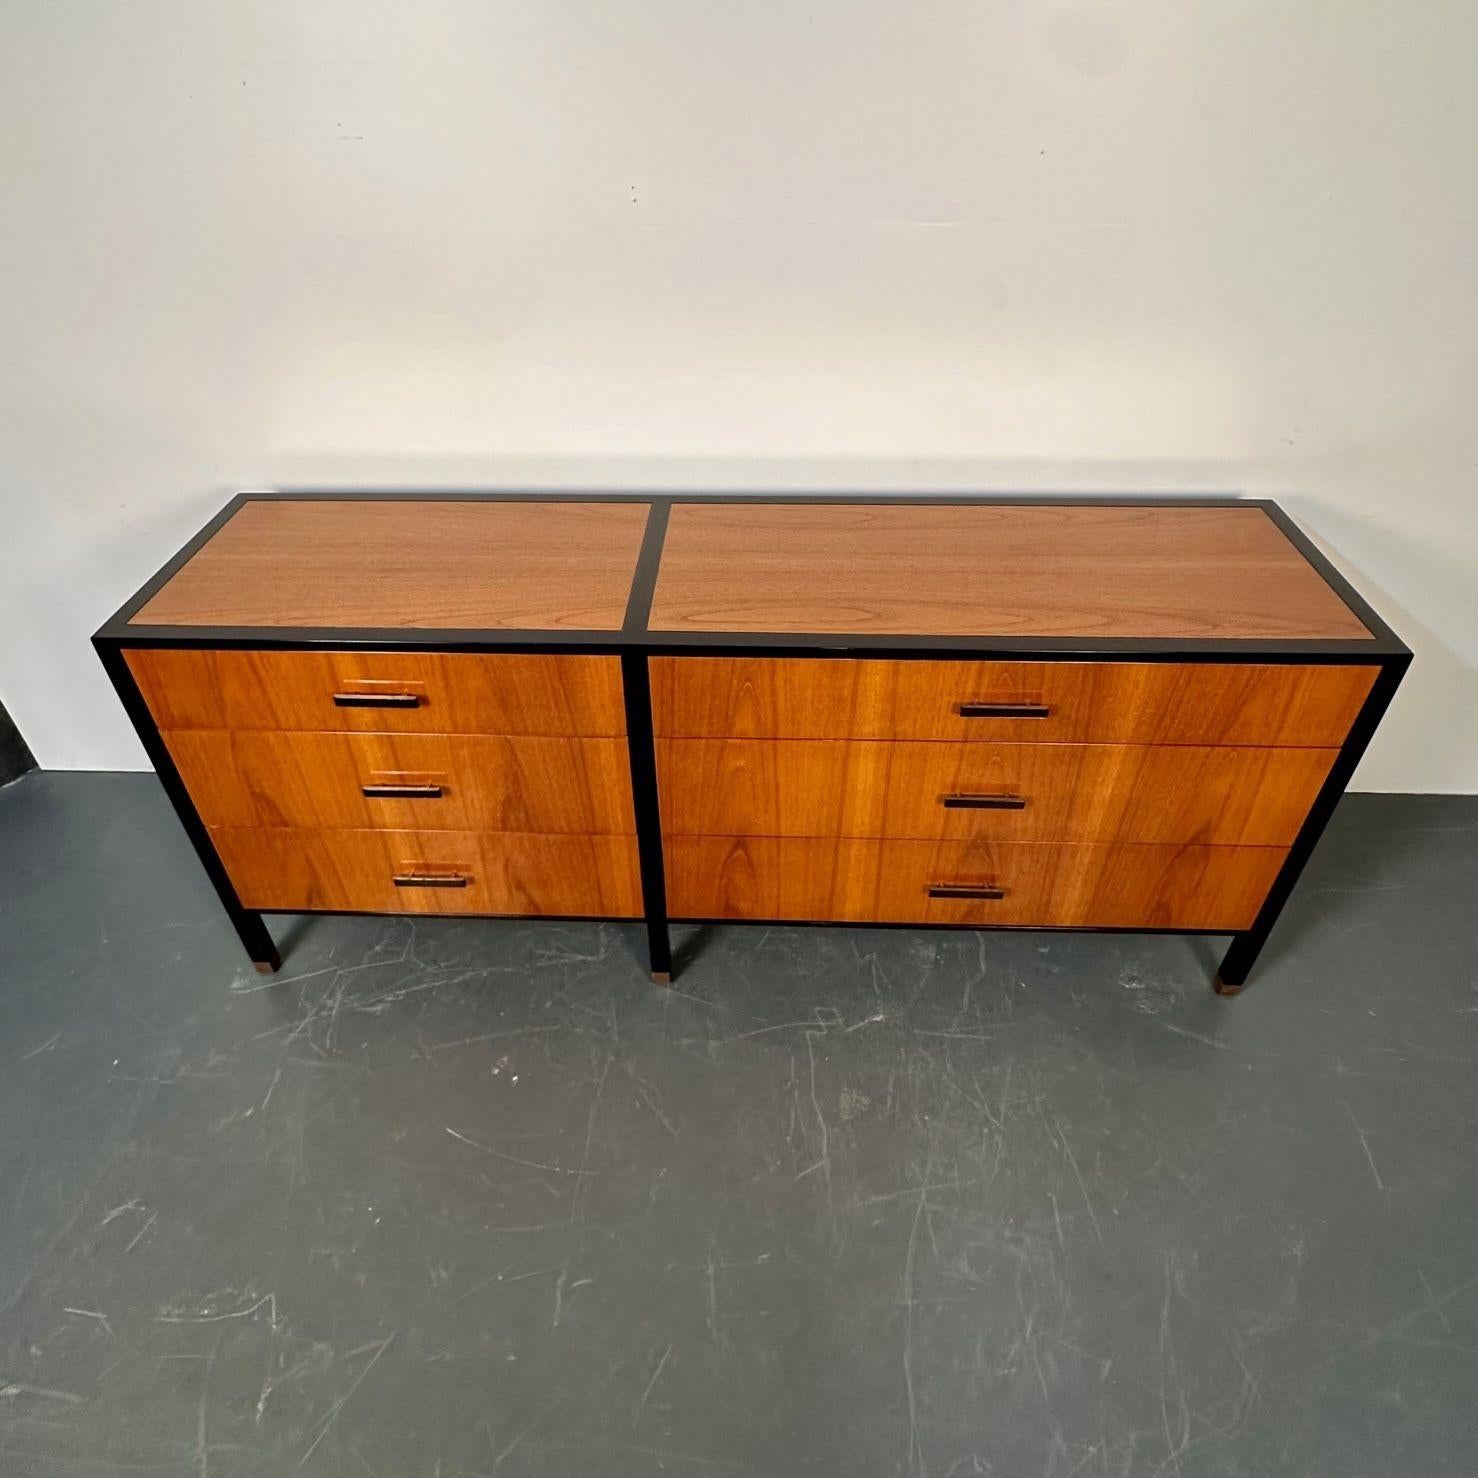 American Mid-Century Modern Rosewood Dresser / Sideboard by Harvey Probber 1960s For Sale 2